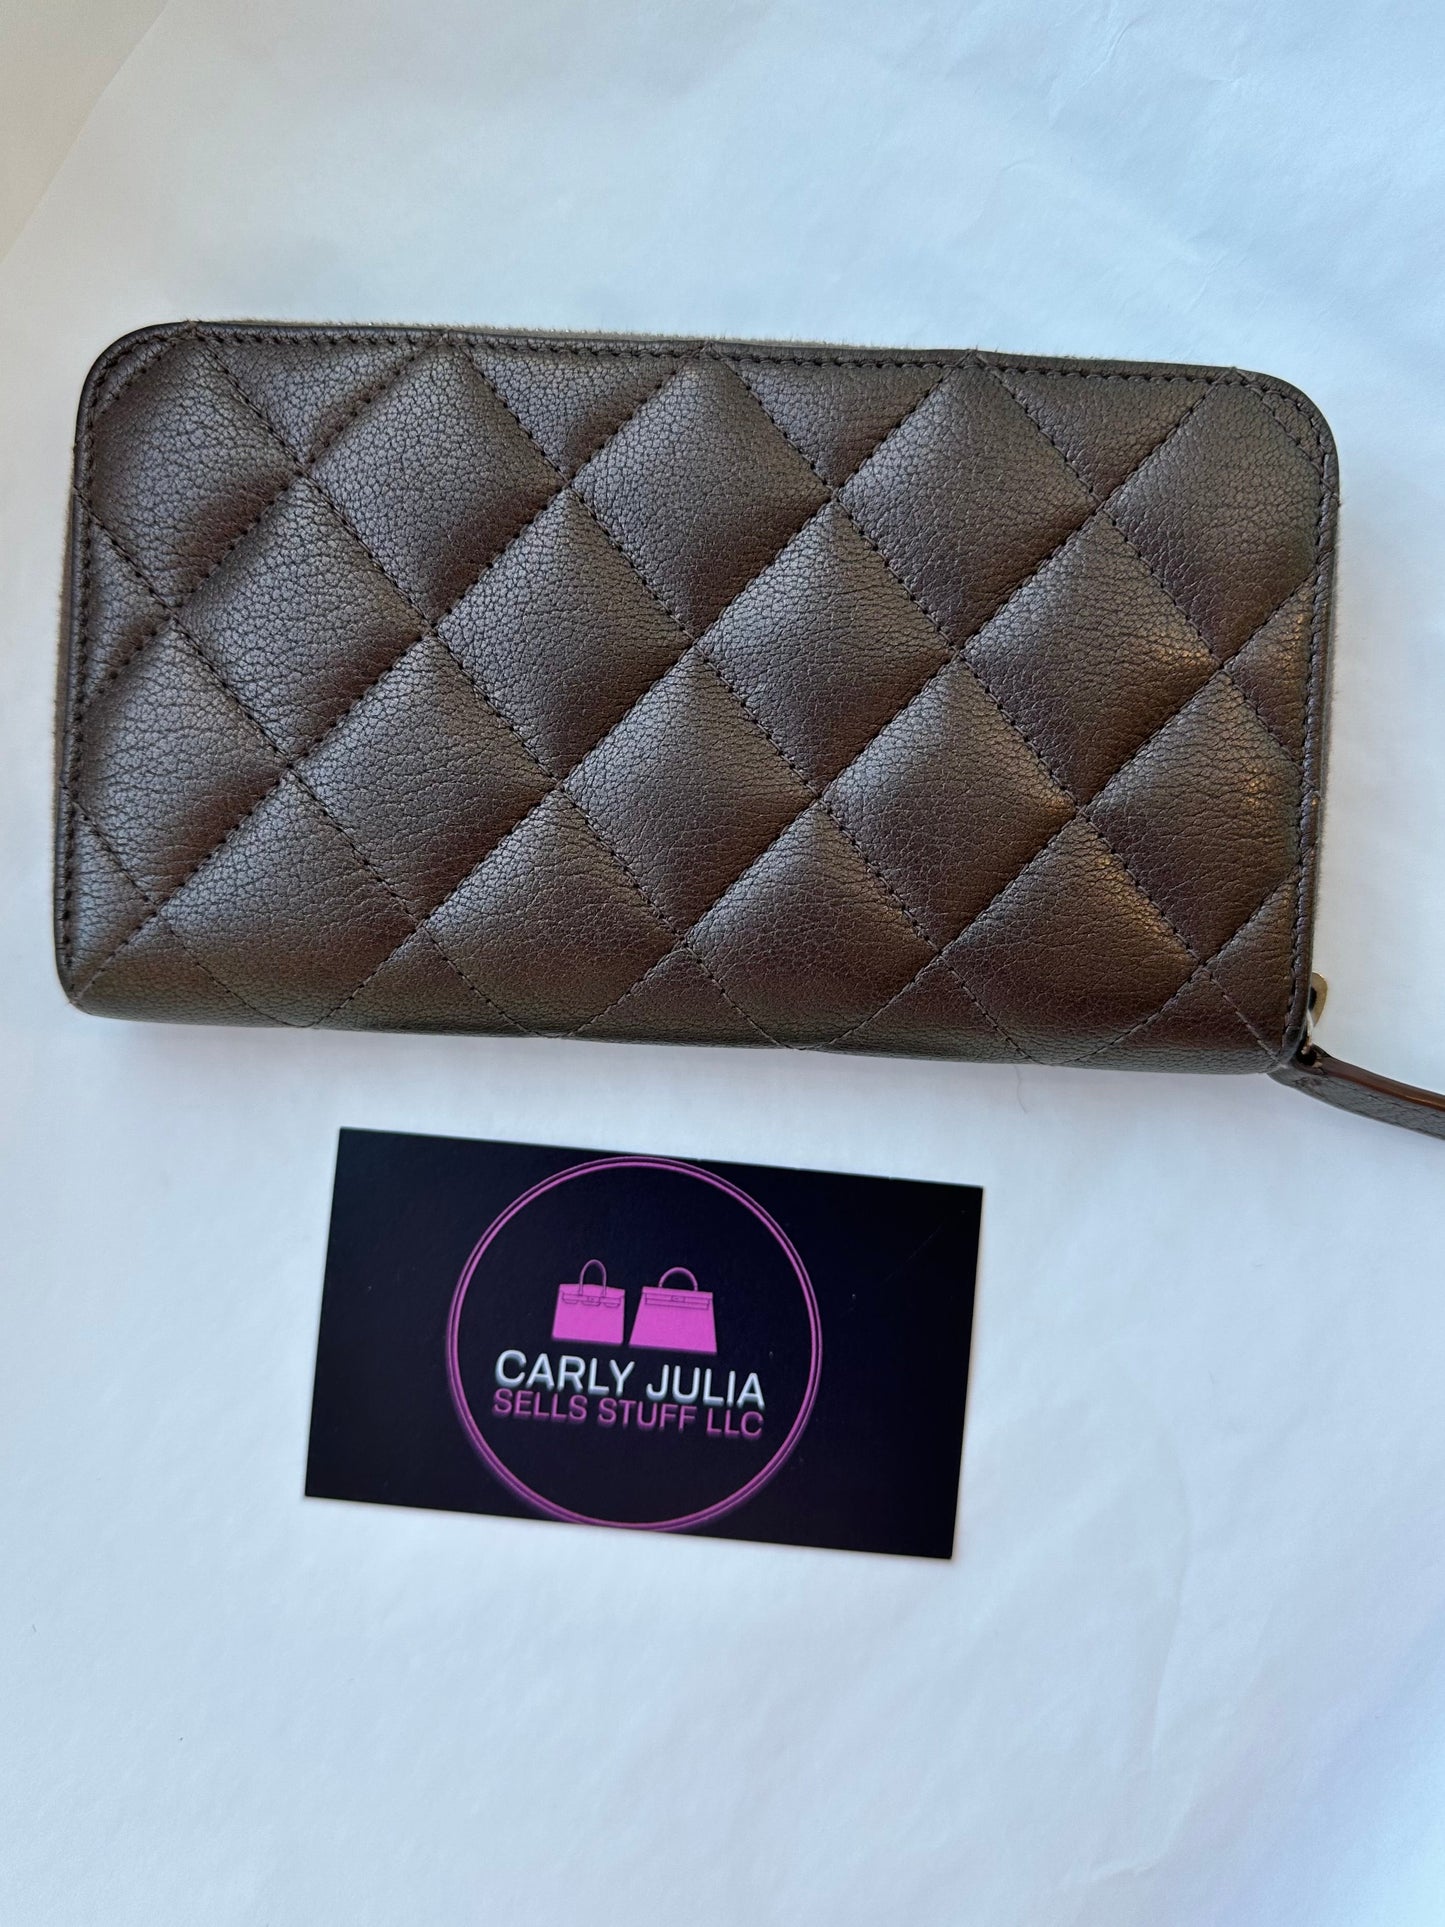 CHANEL Iridescent Goatskin Quilted Large Zip Around Wallet - Carly Julia Sells Stuff, LLC